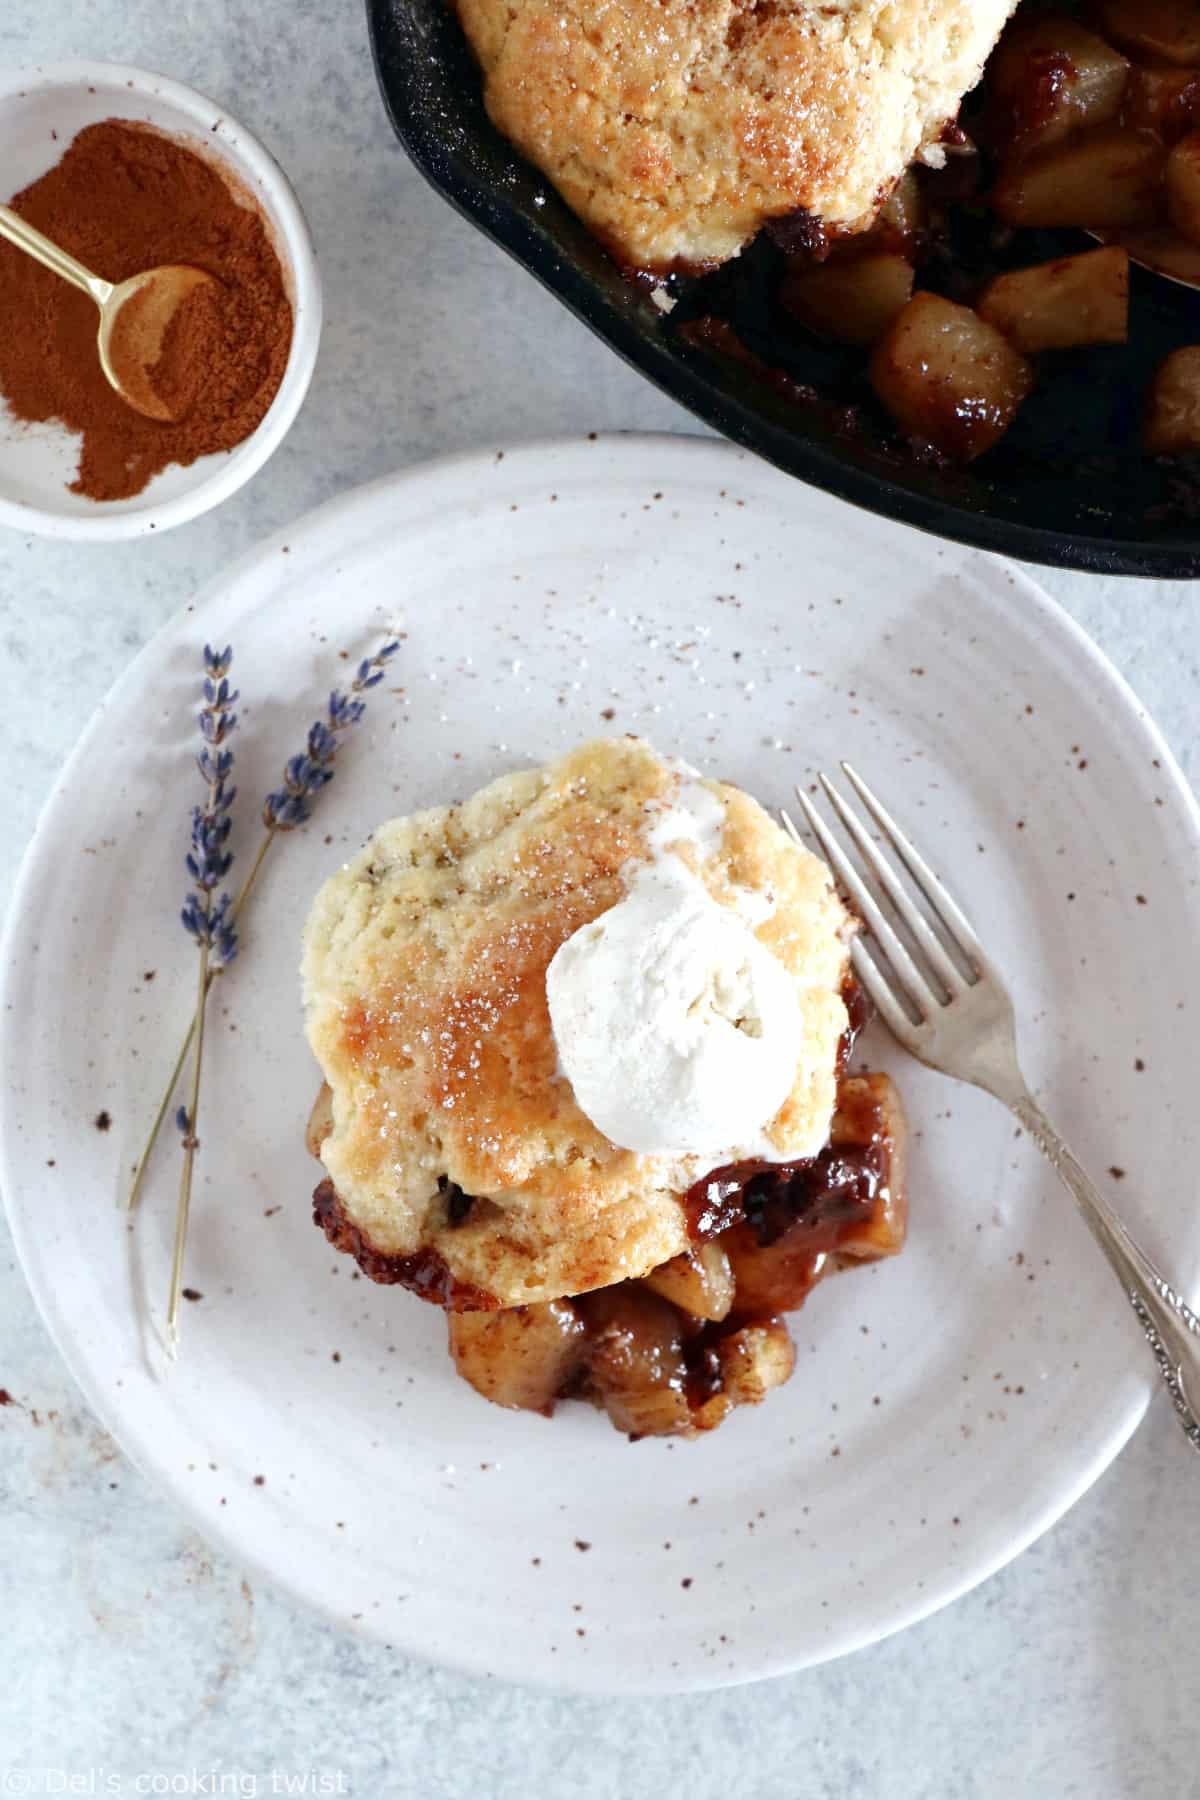 Spiced Chocolate Pear Cobbler is a beautiful dessert featuring dropped biscuit and seasonal fruits coated with a mix of warm Autumn spices and dark chocolate.